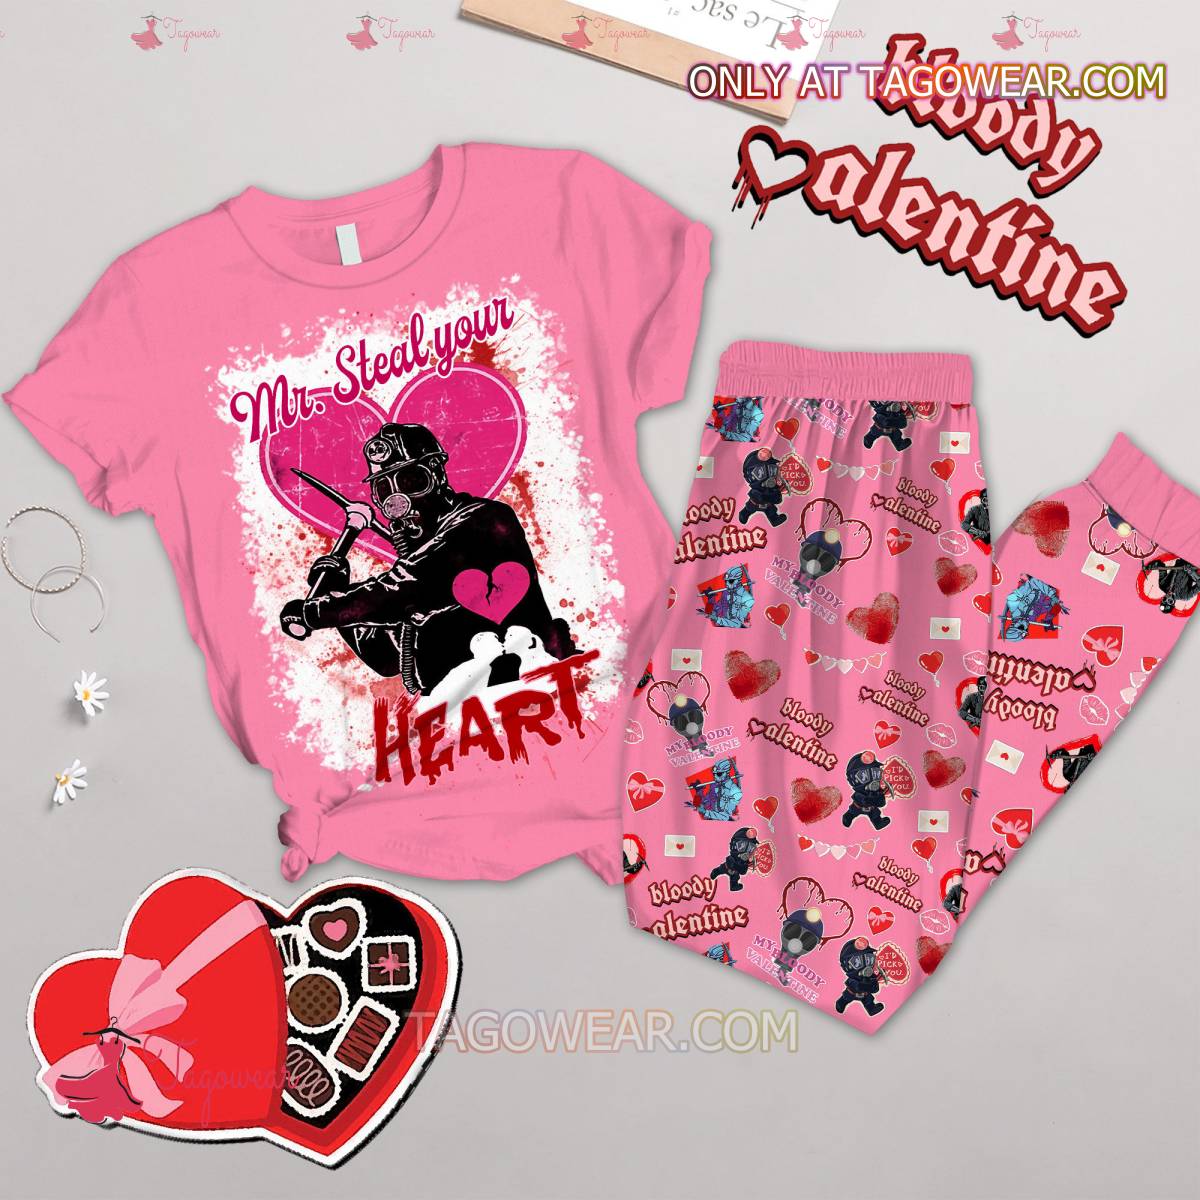 Mr. Steal Your Heart Bloody Valentine Pajamas Set